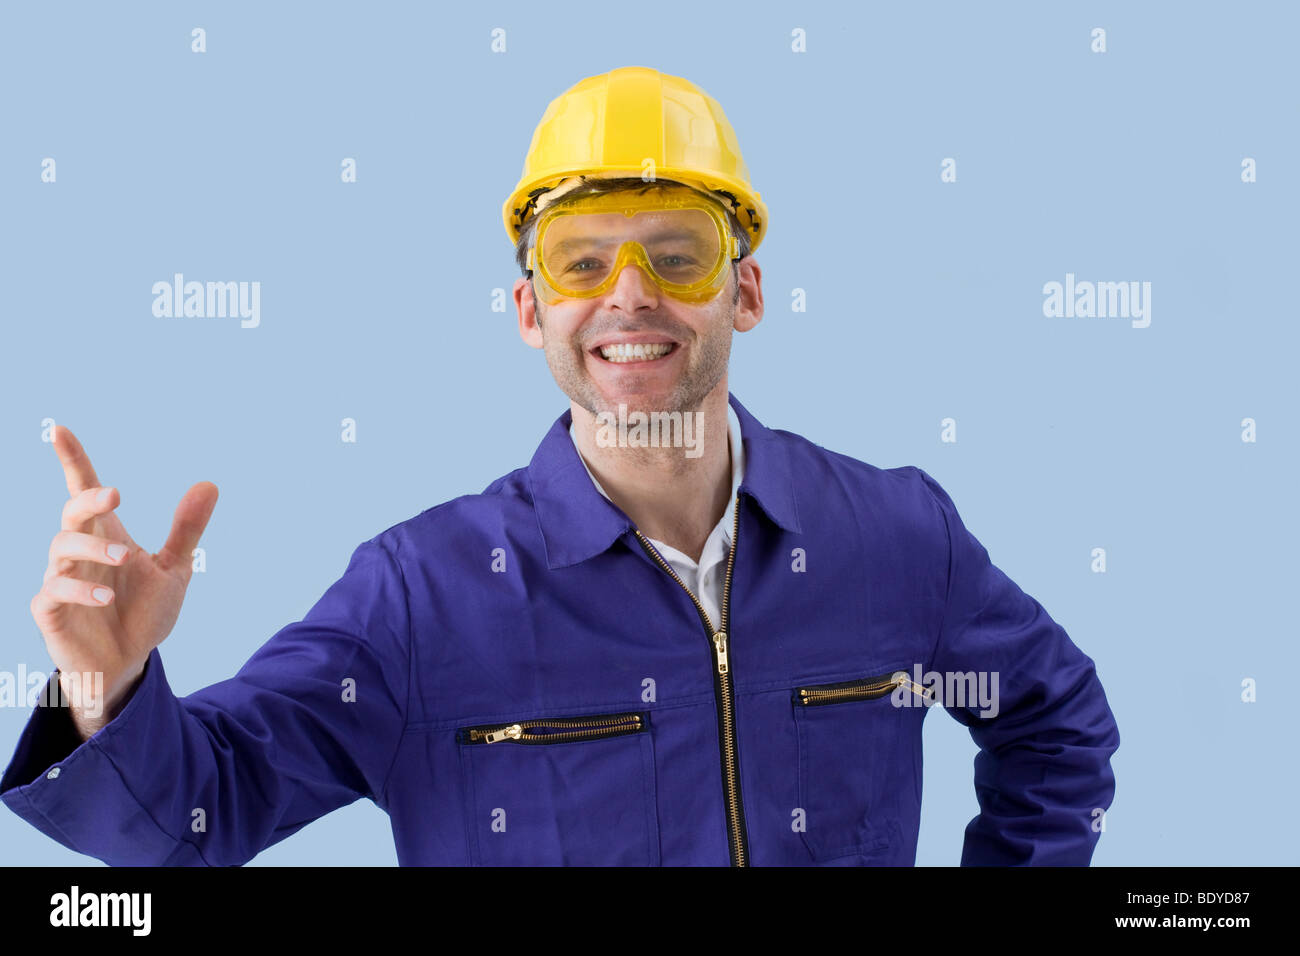 Free Photos - Two Men In Blue Overalls, Orange Hard Hats, And Safety  Goggles. They Are Posing Together In A Friendly Manner, Possibly After A  Long Day Of Work. They Appear To